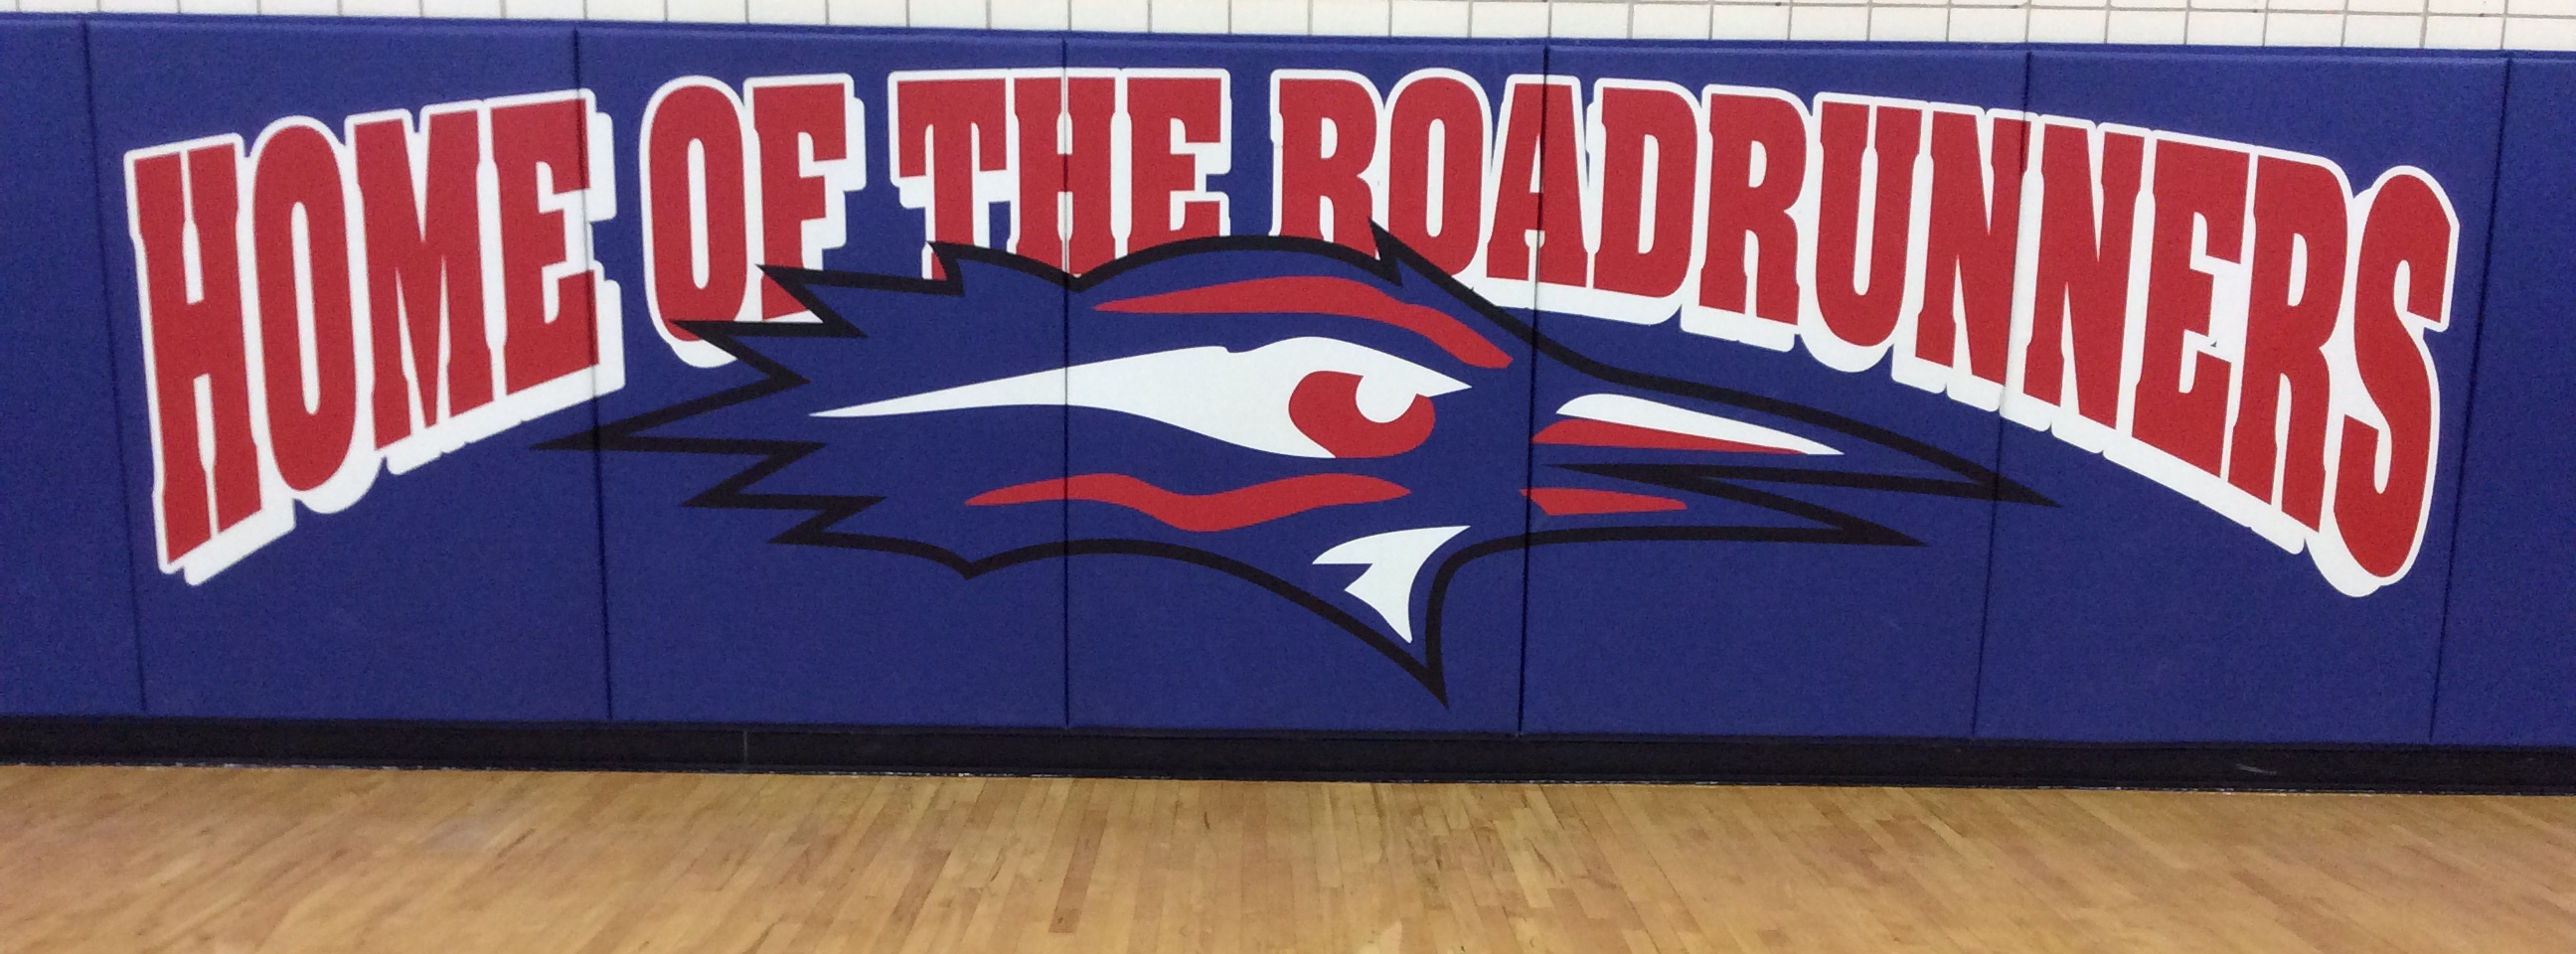 Home of the Roadrunners